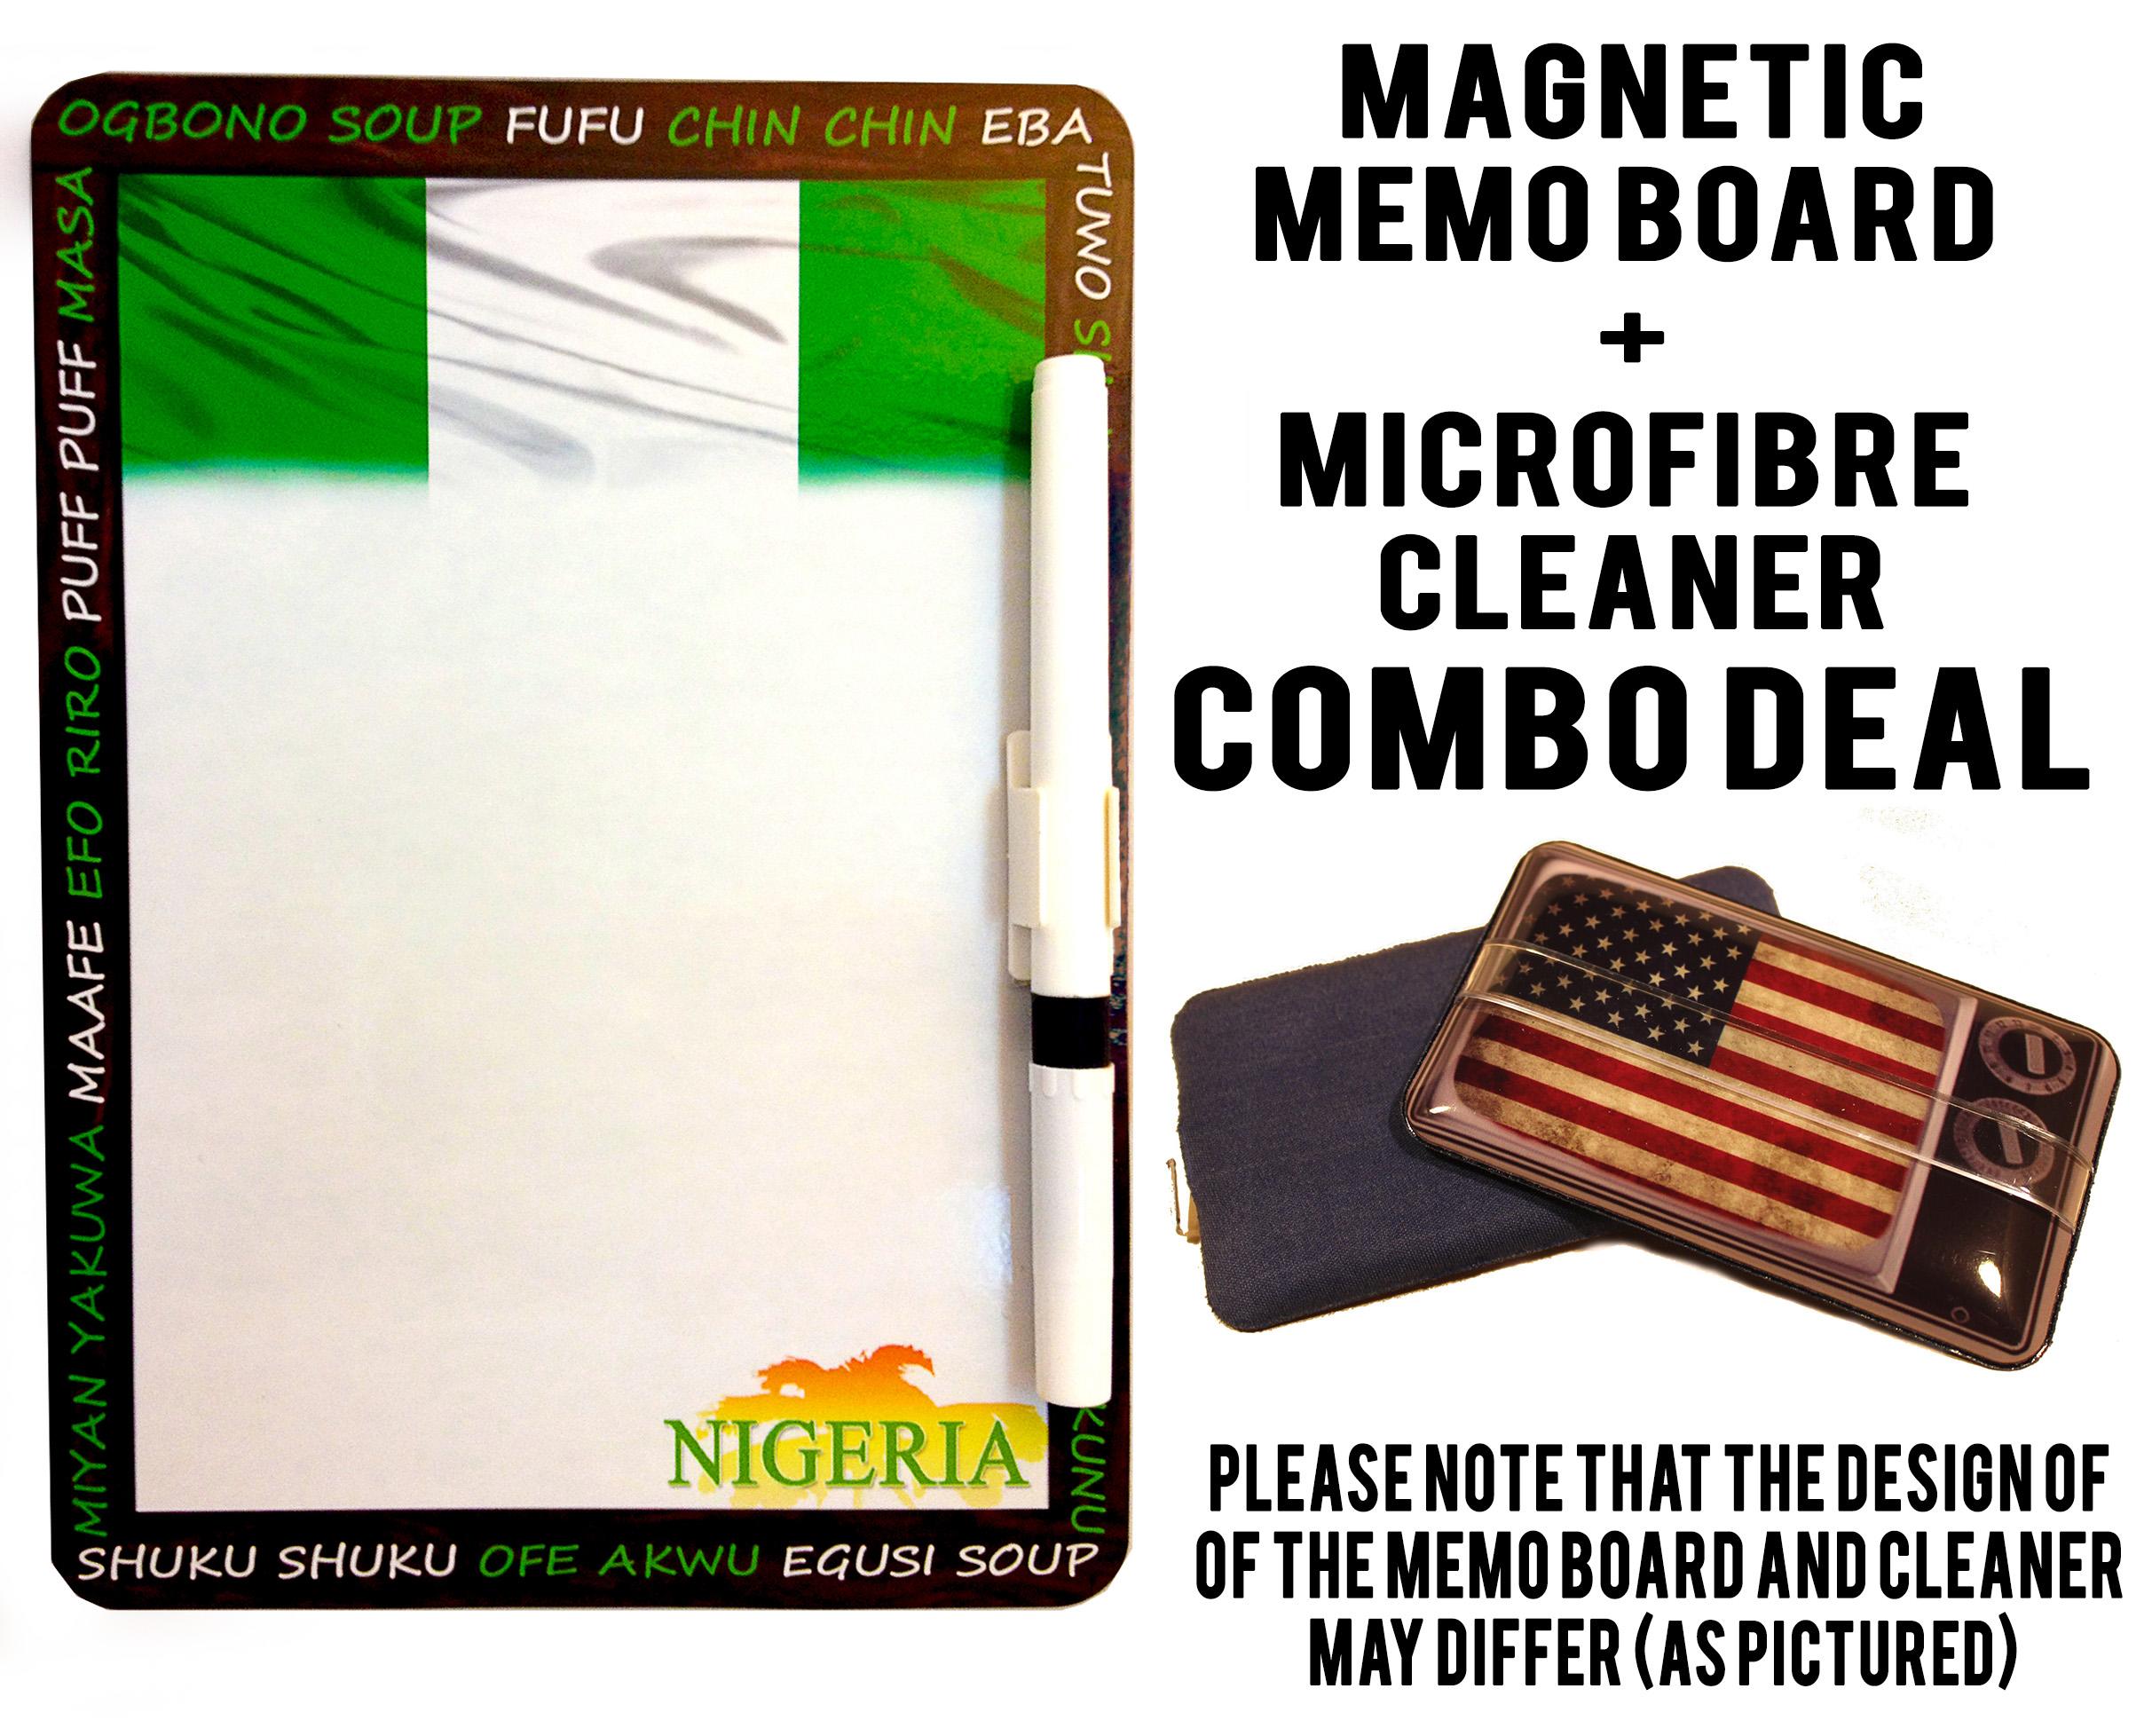 Nigeria Magnetic Reminder Memo board with cleaner